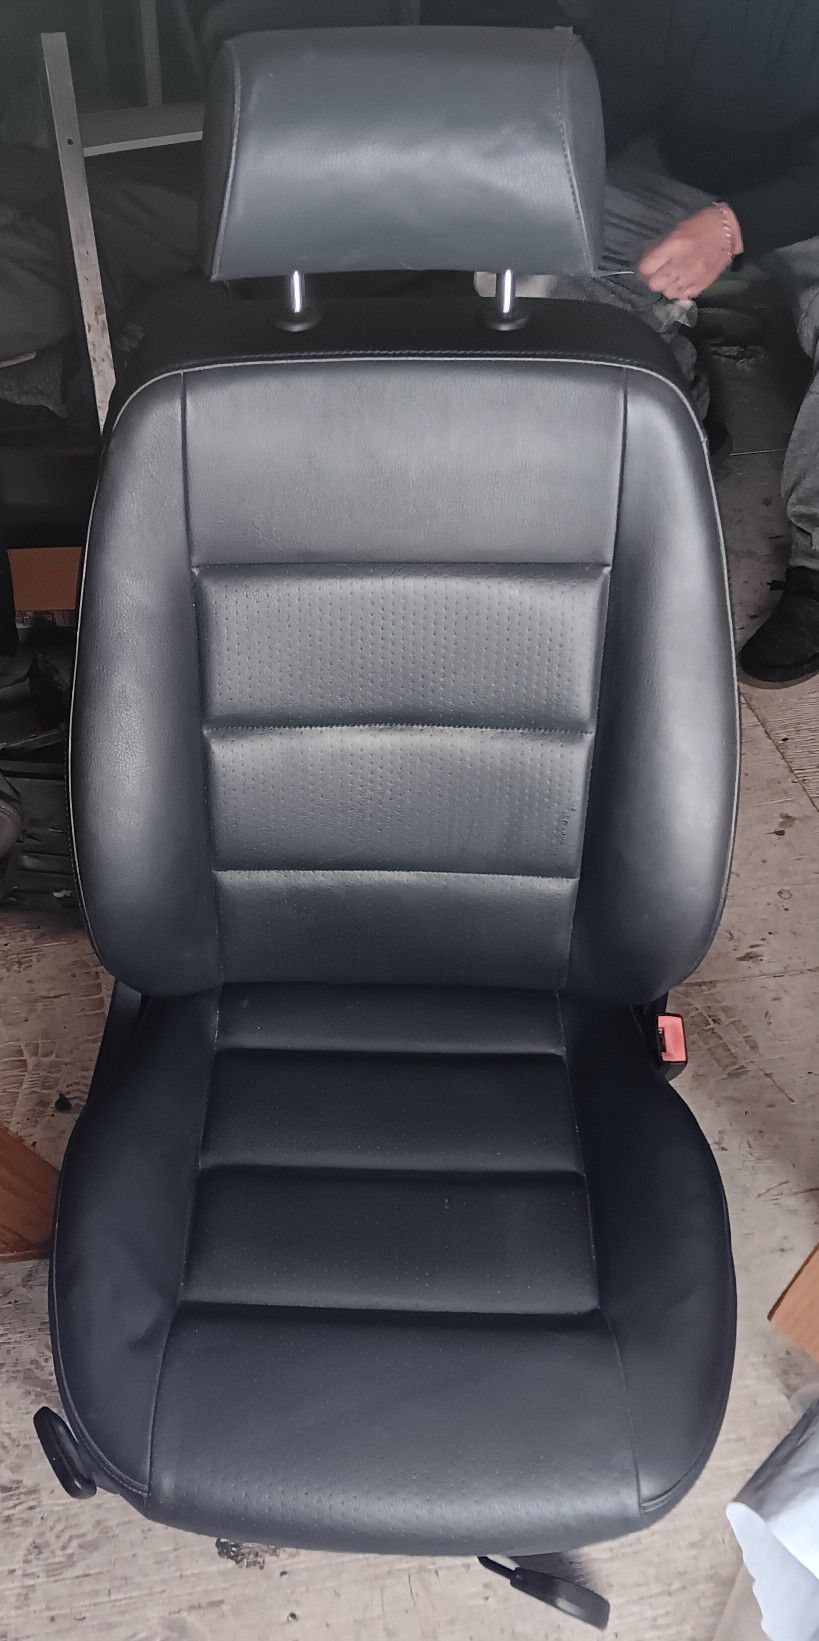  Audi A4 Seat Full  Set Front And Rear Soft Leather